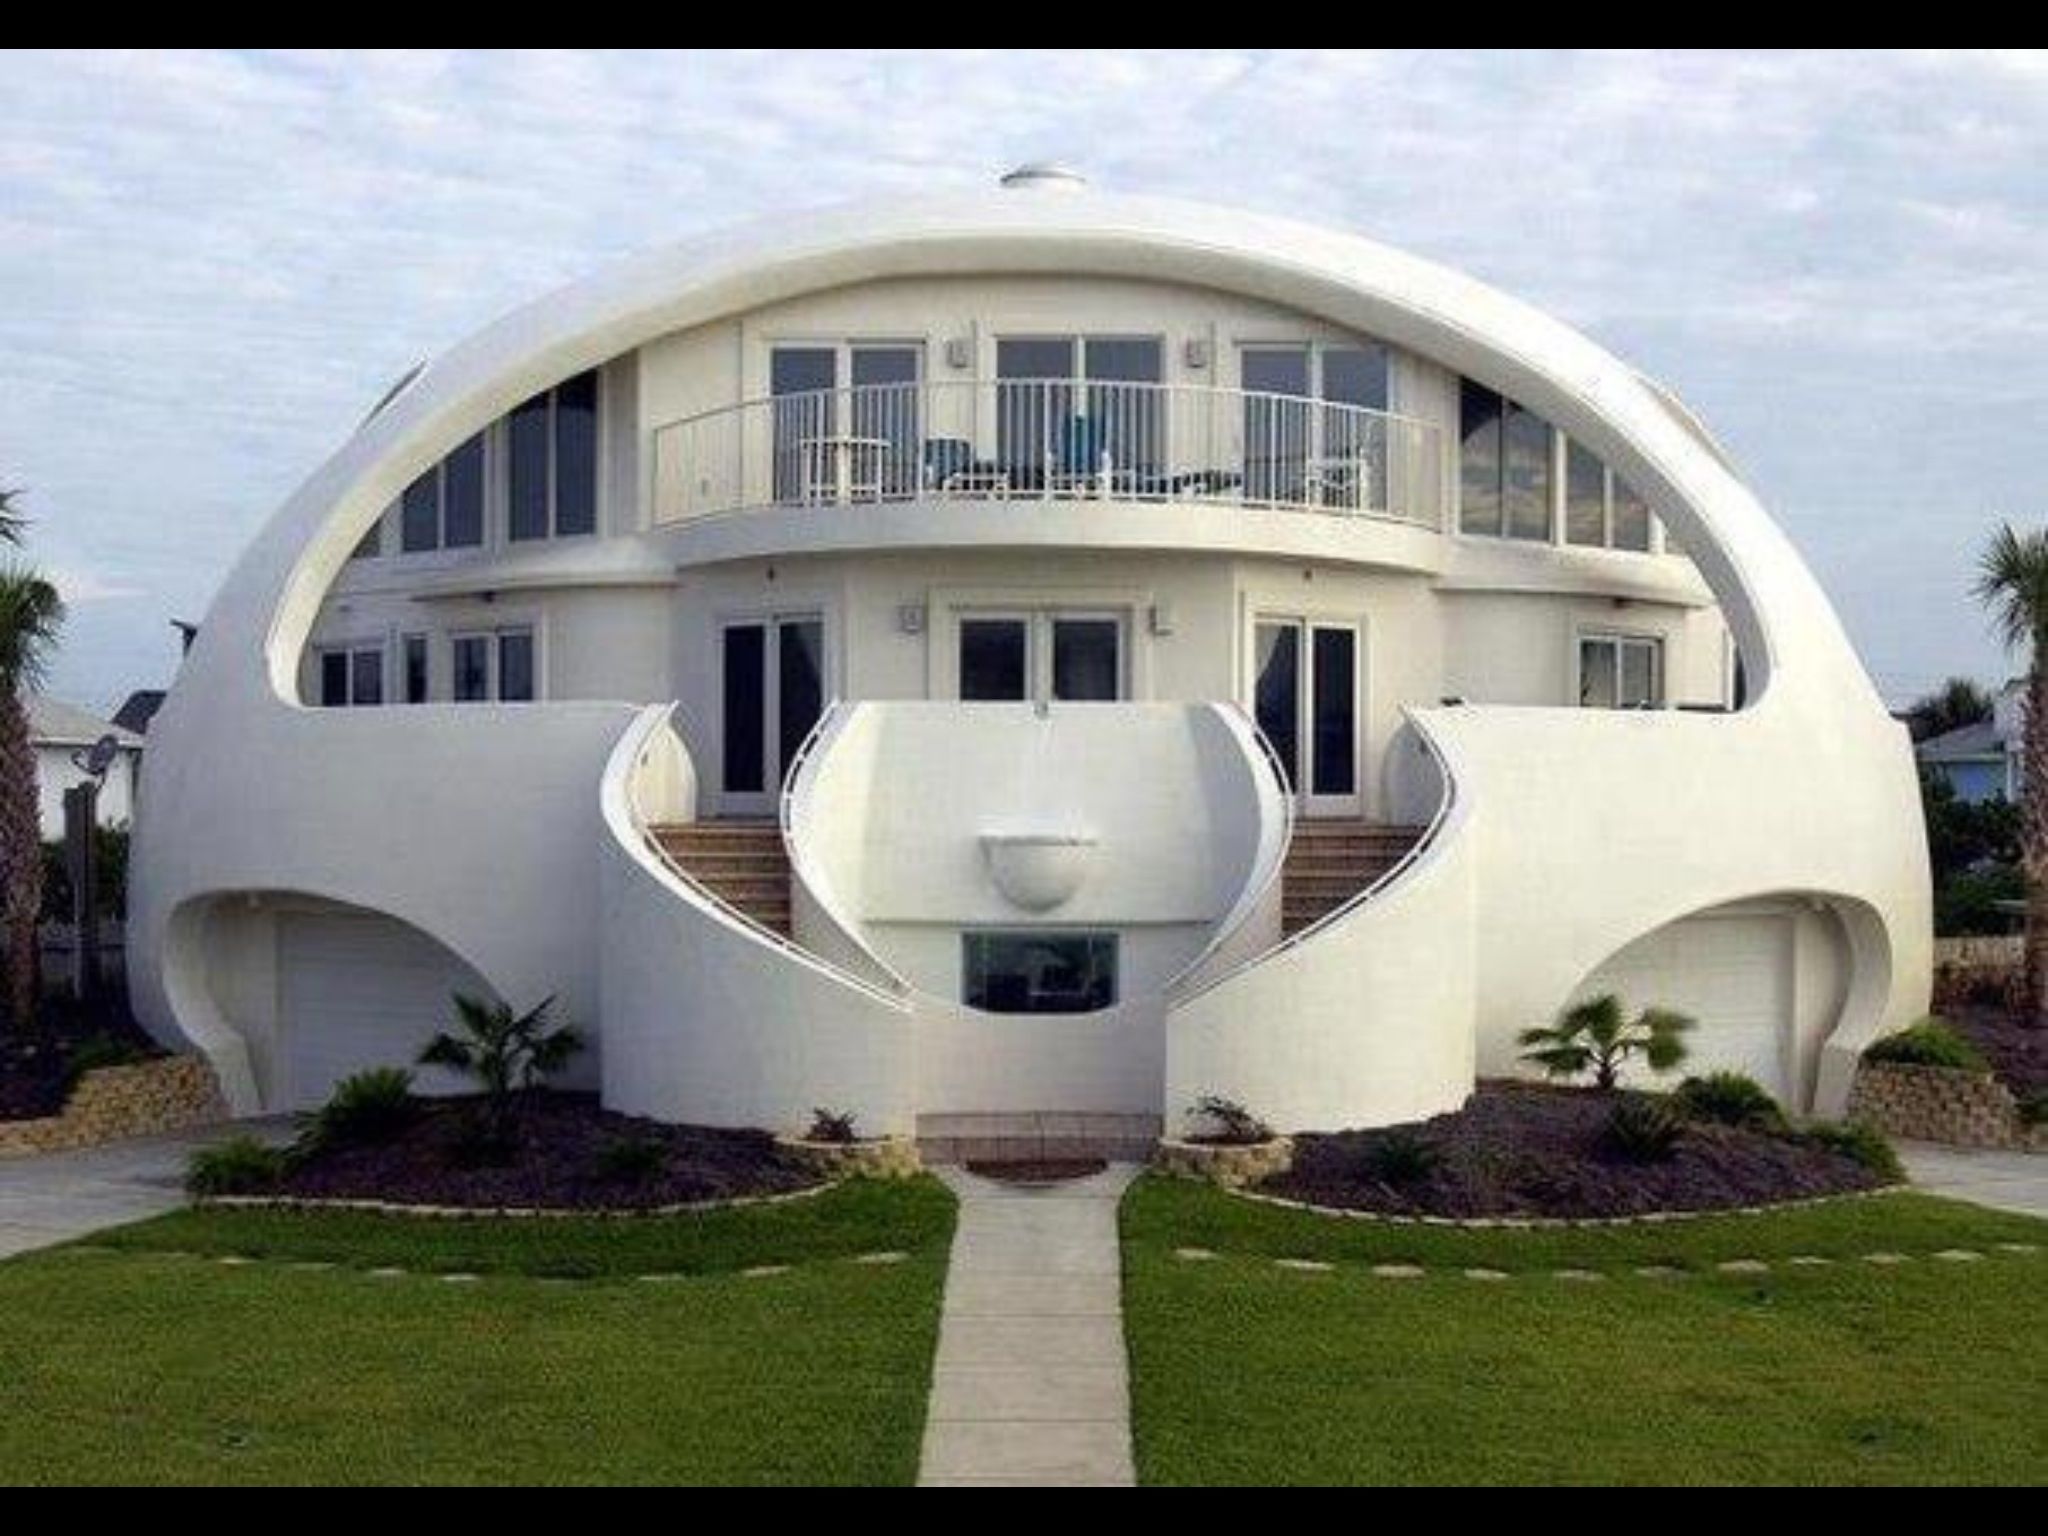 Round house | wow houses | Pinterest | Round house, House and ...